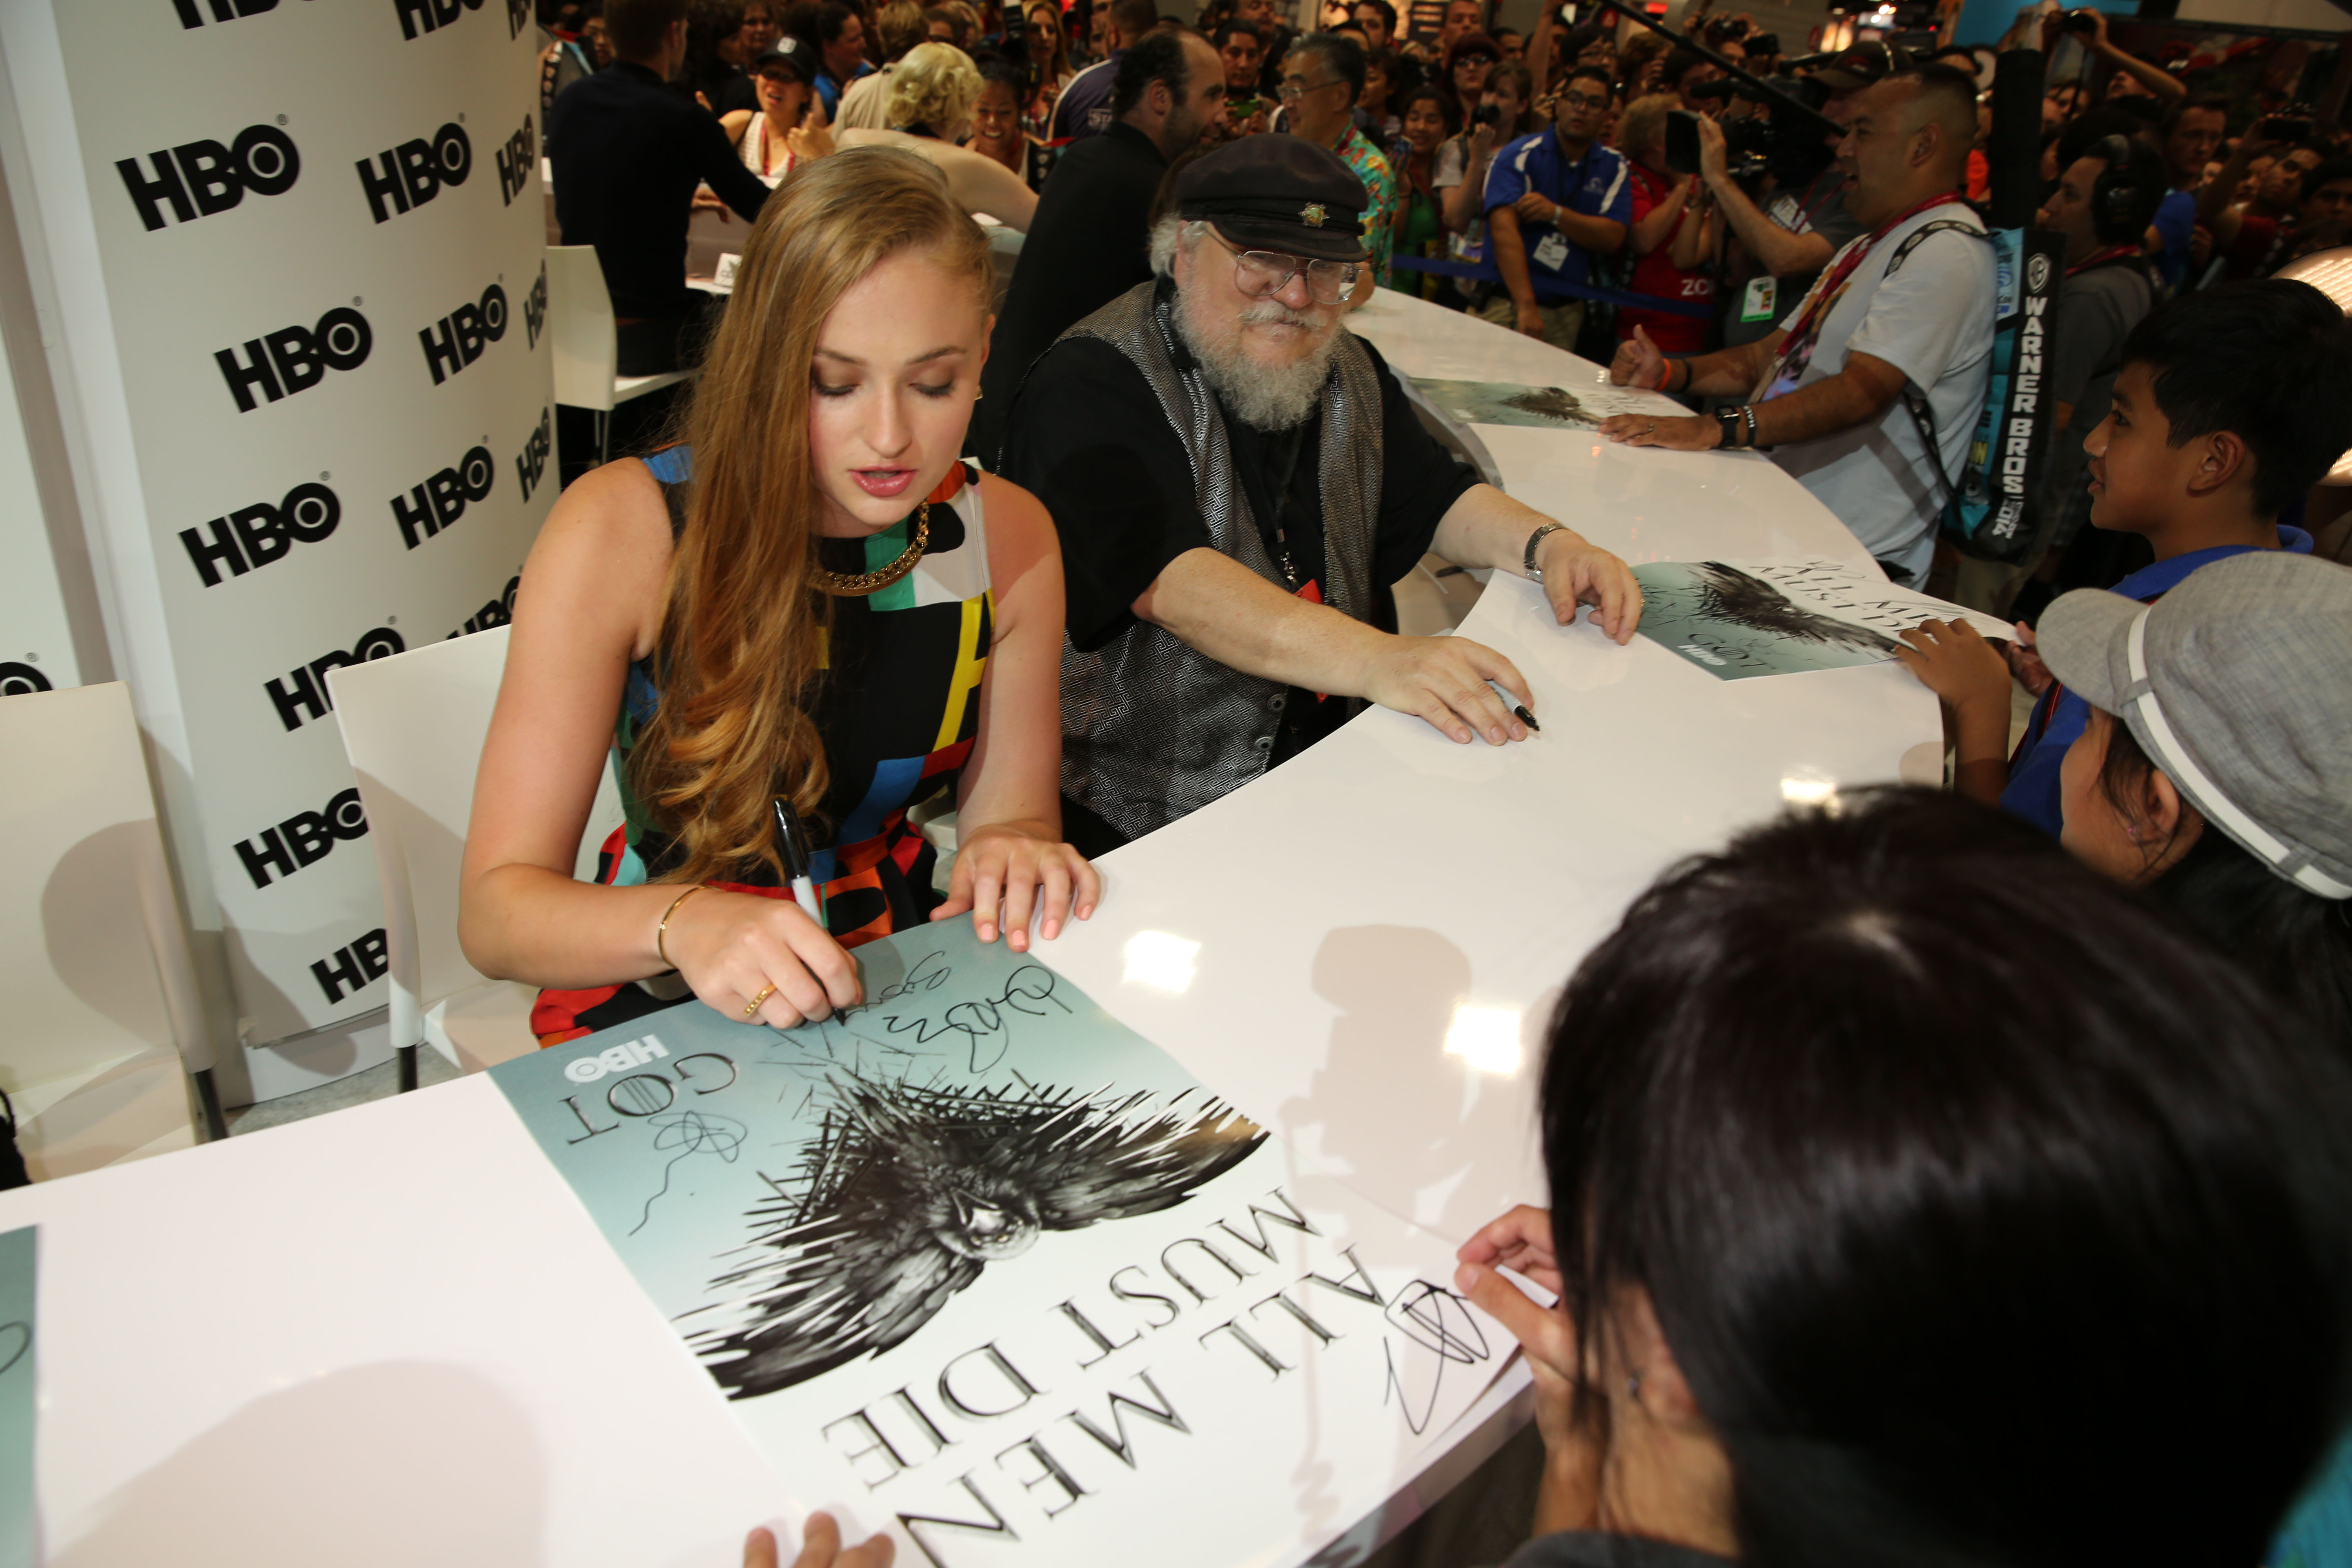 GAME OF THRONES at Comic-Con